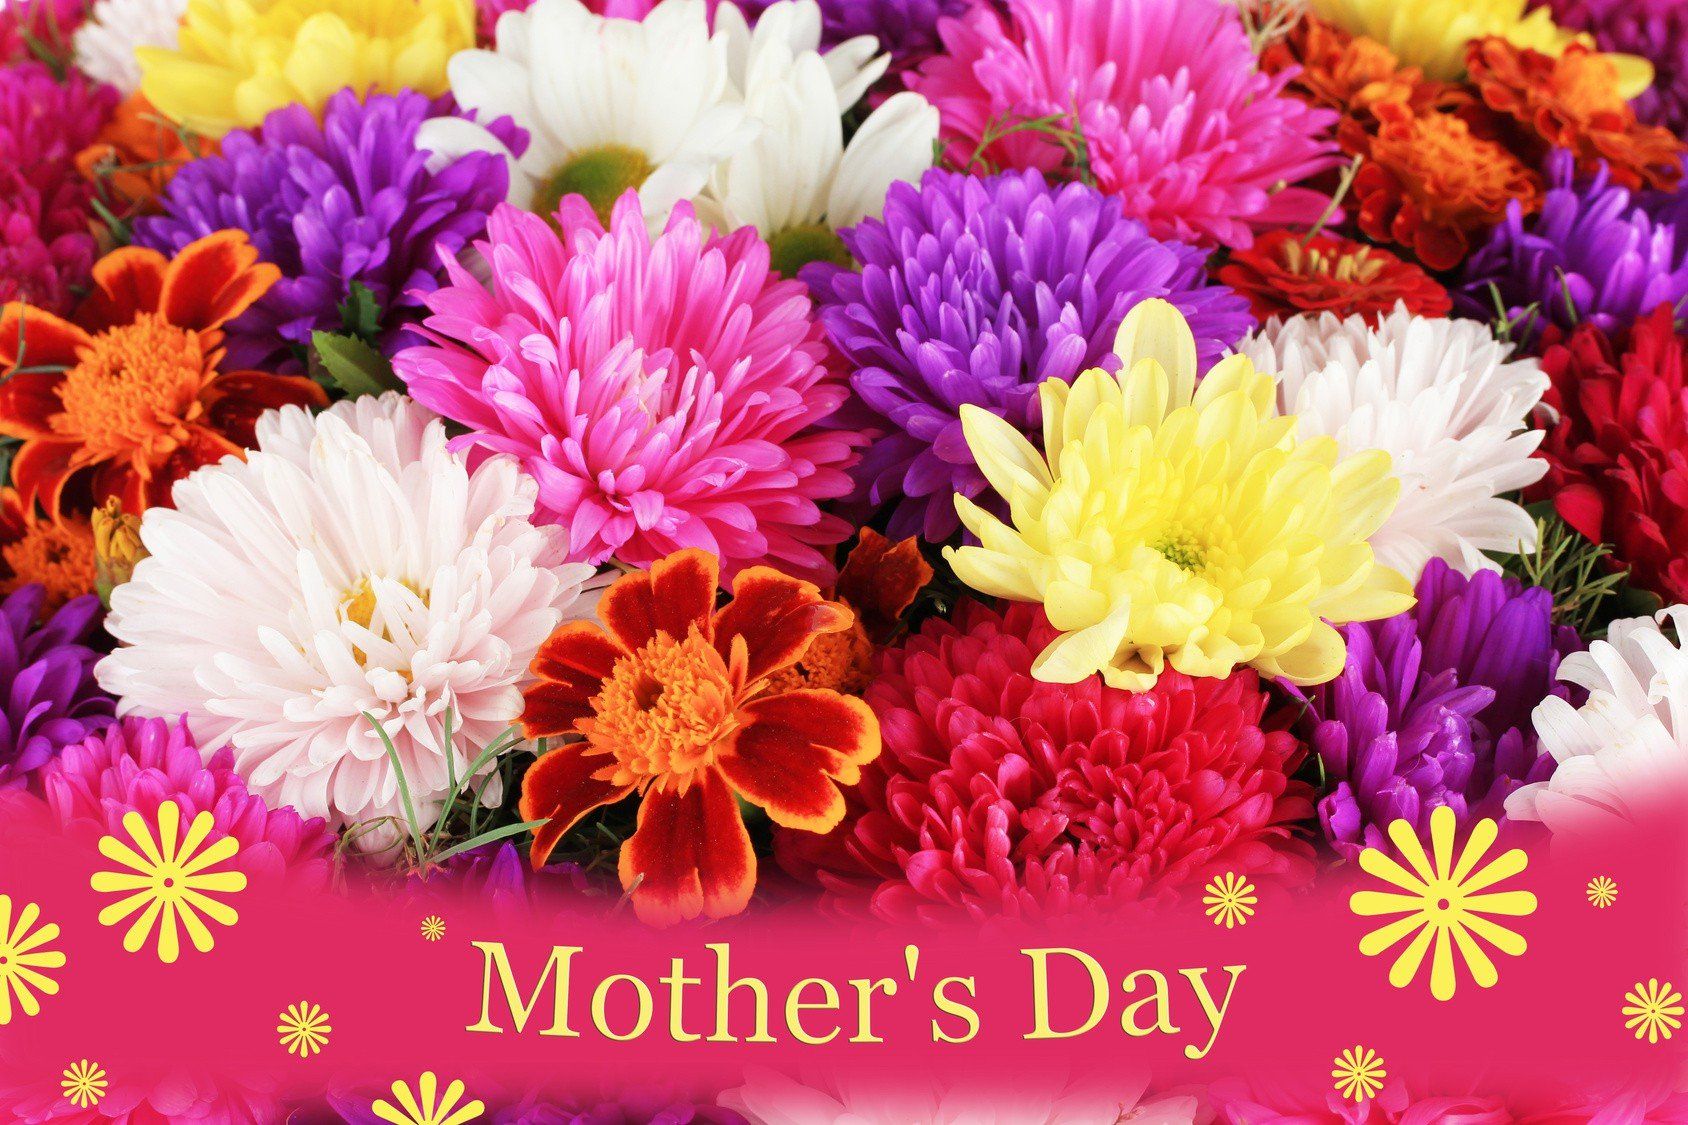 Free download Happy Mothers Day Wallpaper on WallpaperGetcom [1688x1125] for your Desktop, Mobile & Tablet. Explore Mother's Day Desktop Wallpaper. Mothers Day Wallpaper, Happy Mothers Day Wallpaper, Mothers Day iPhone Wallpaper